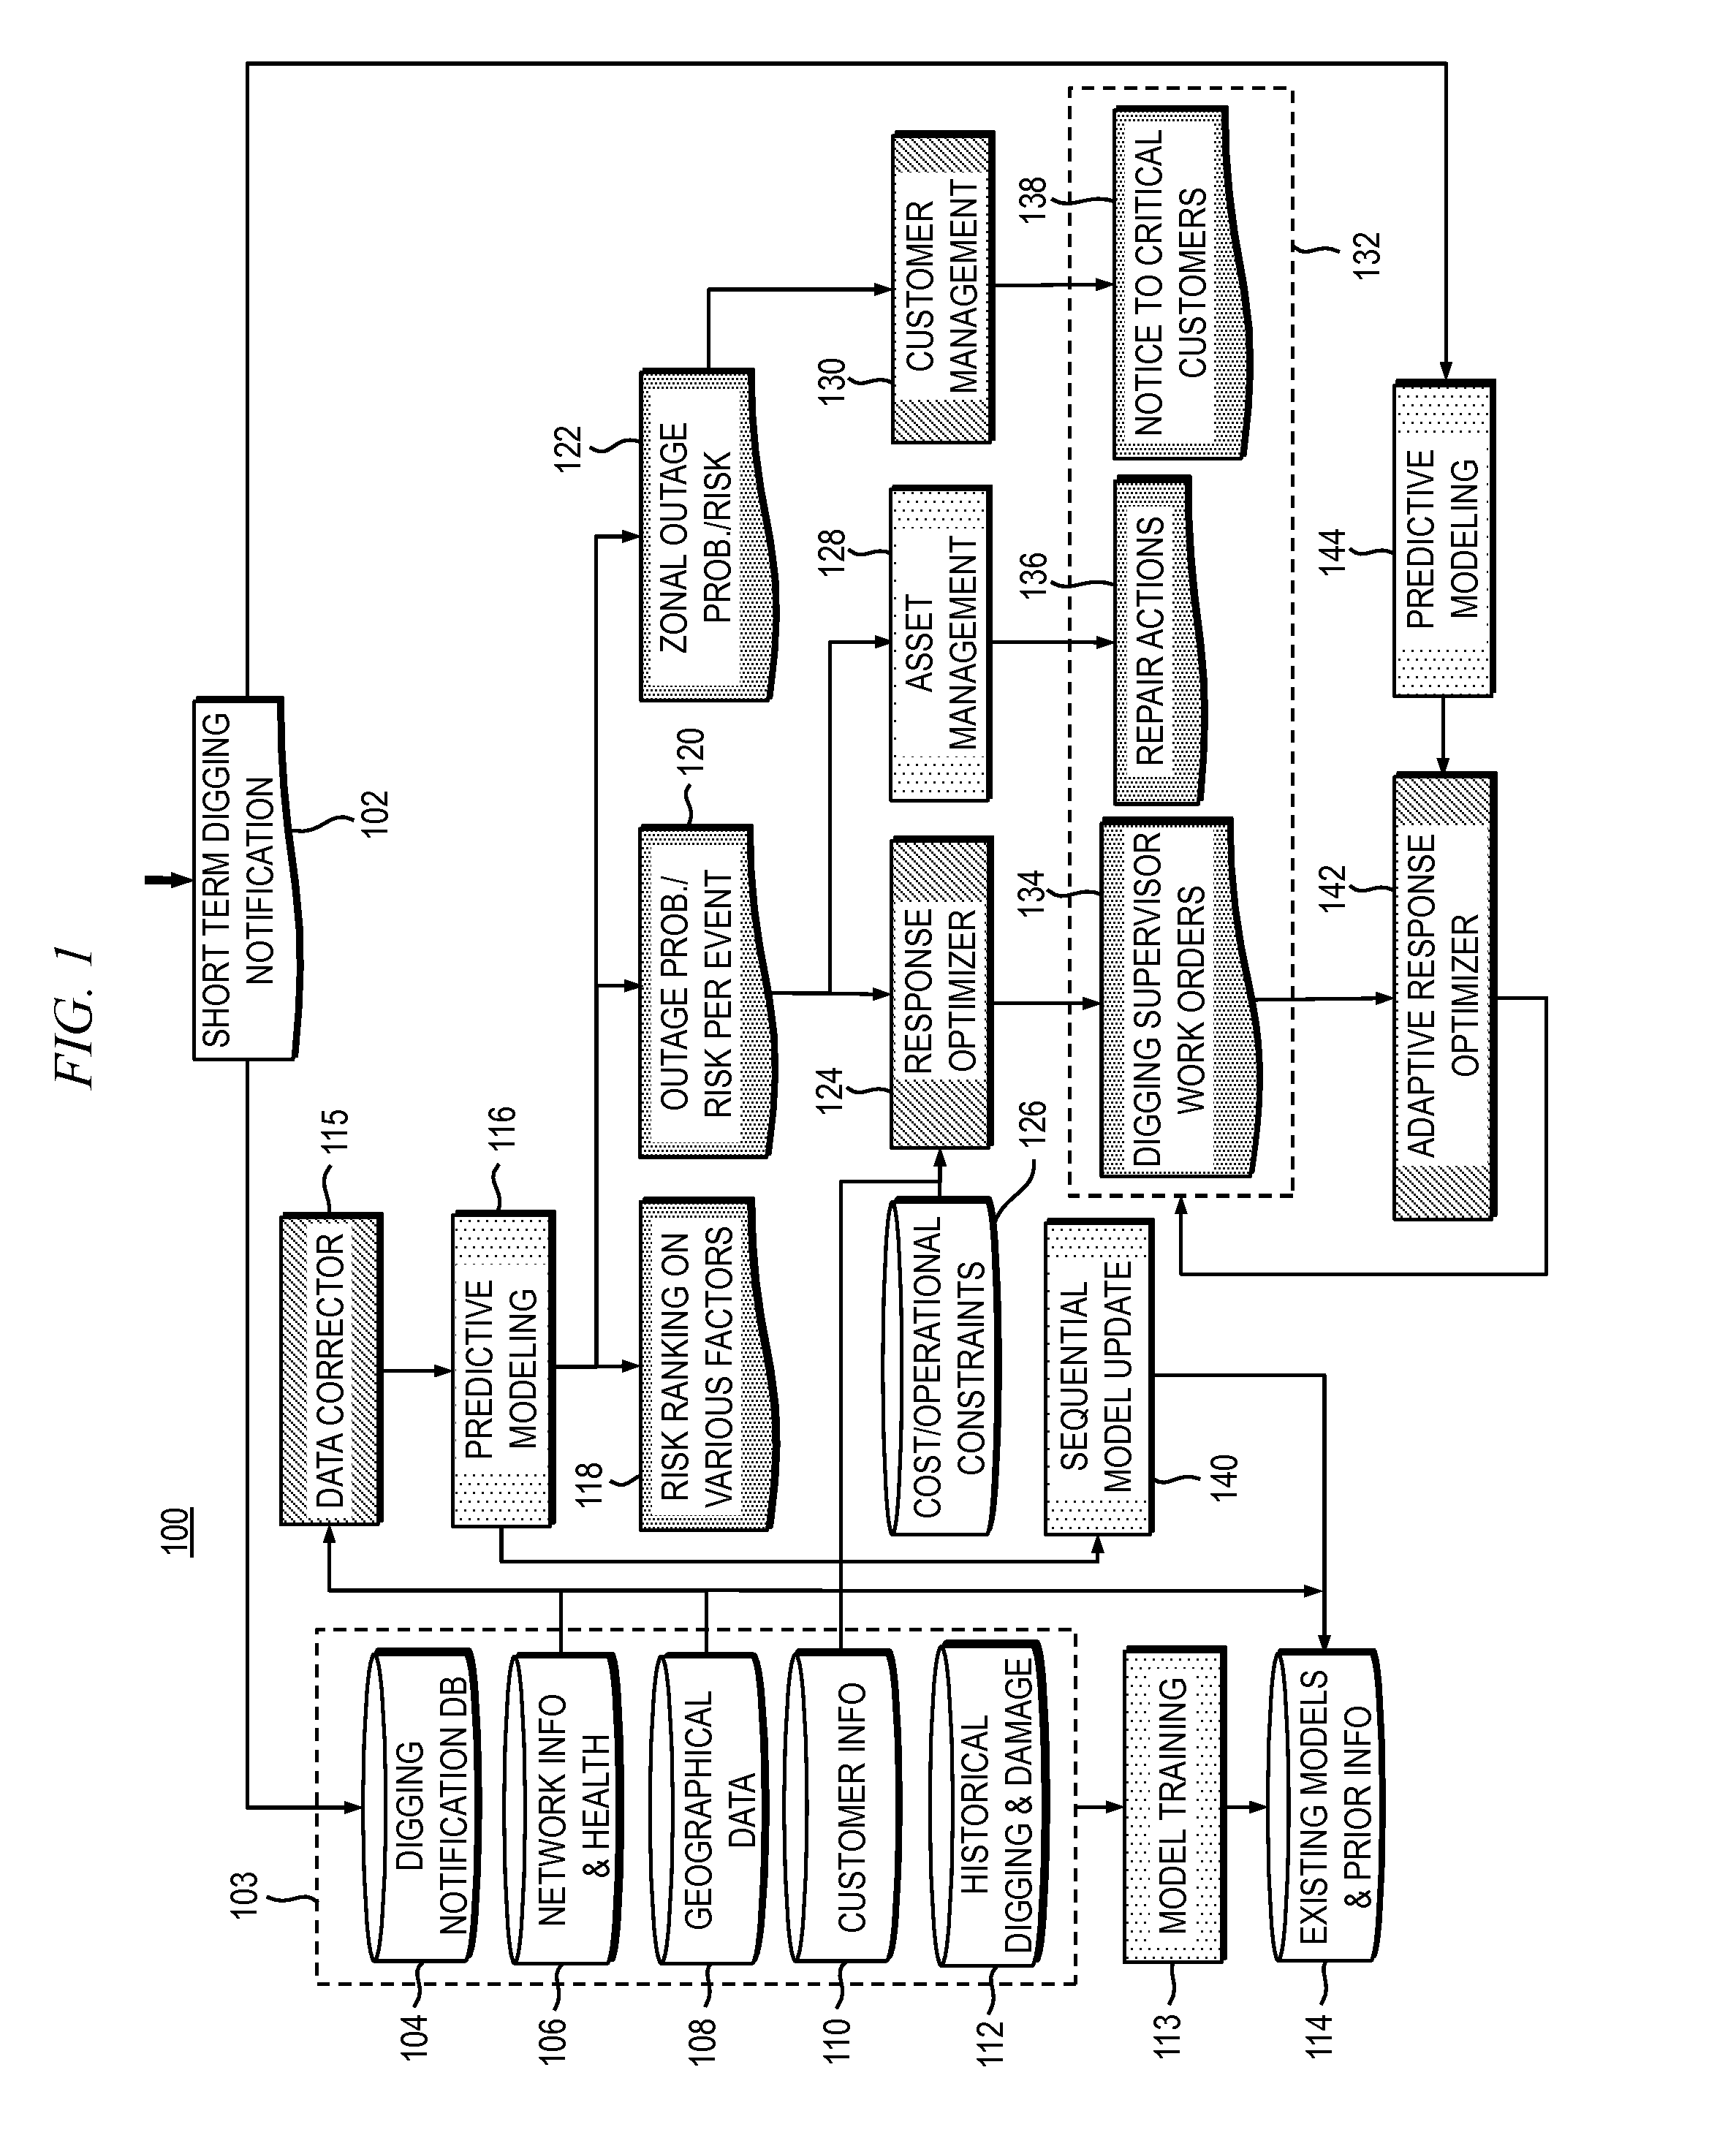 System and method to reduce human activity damage-induced power outage